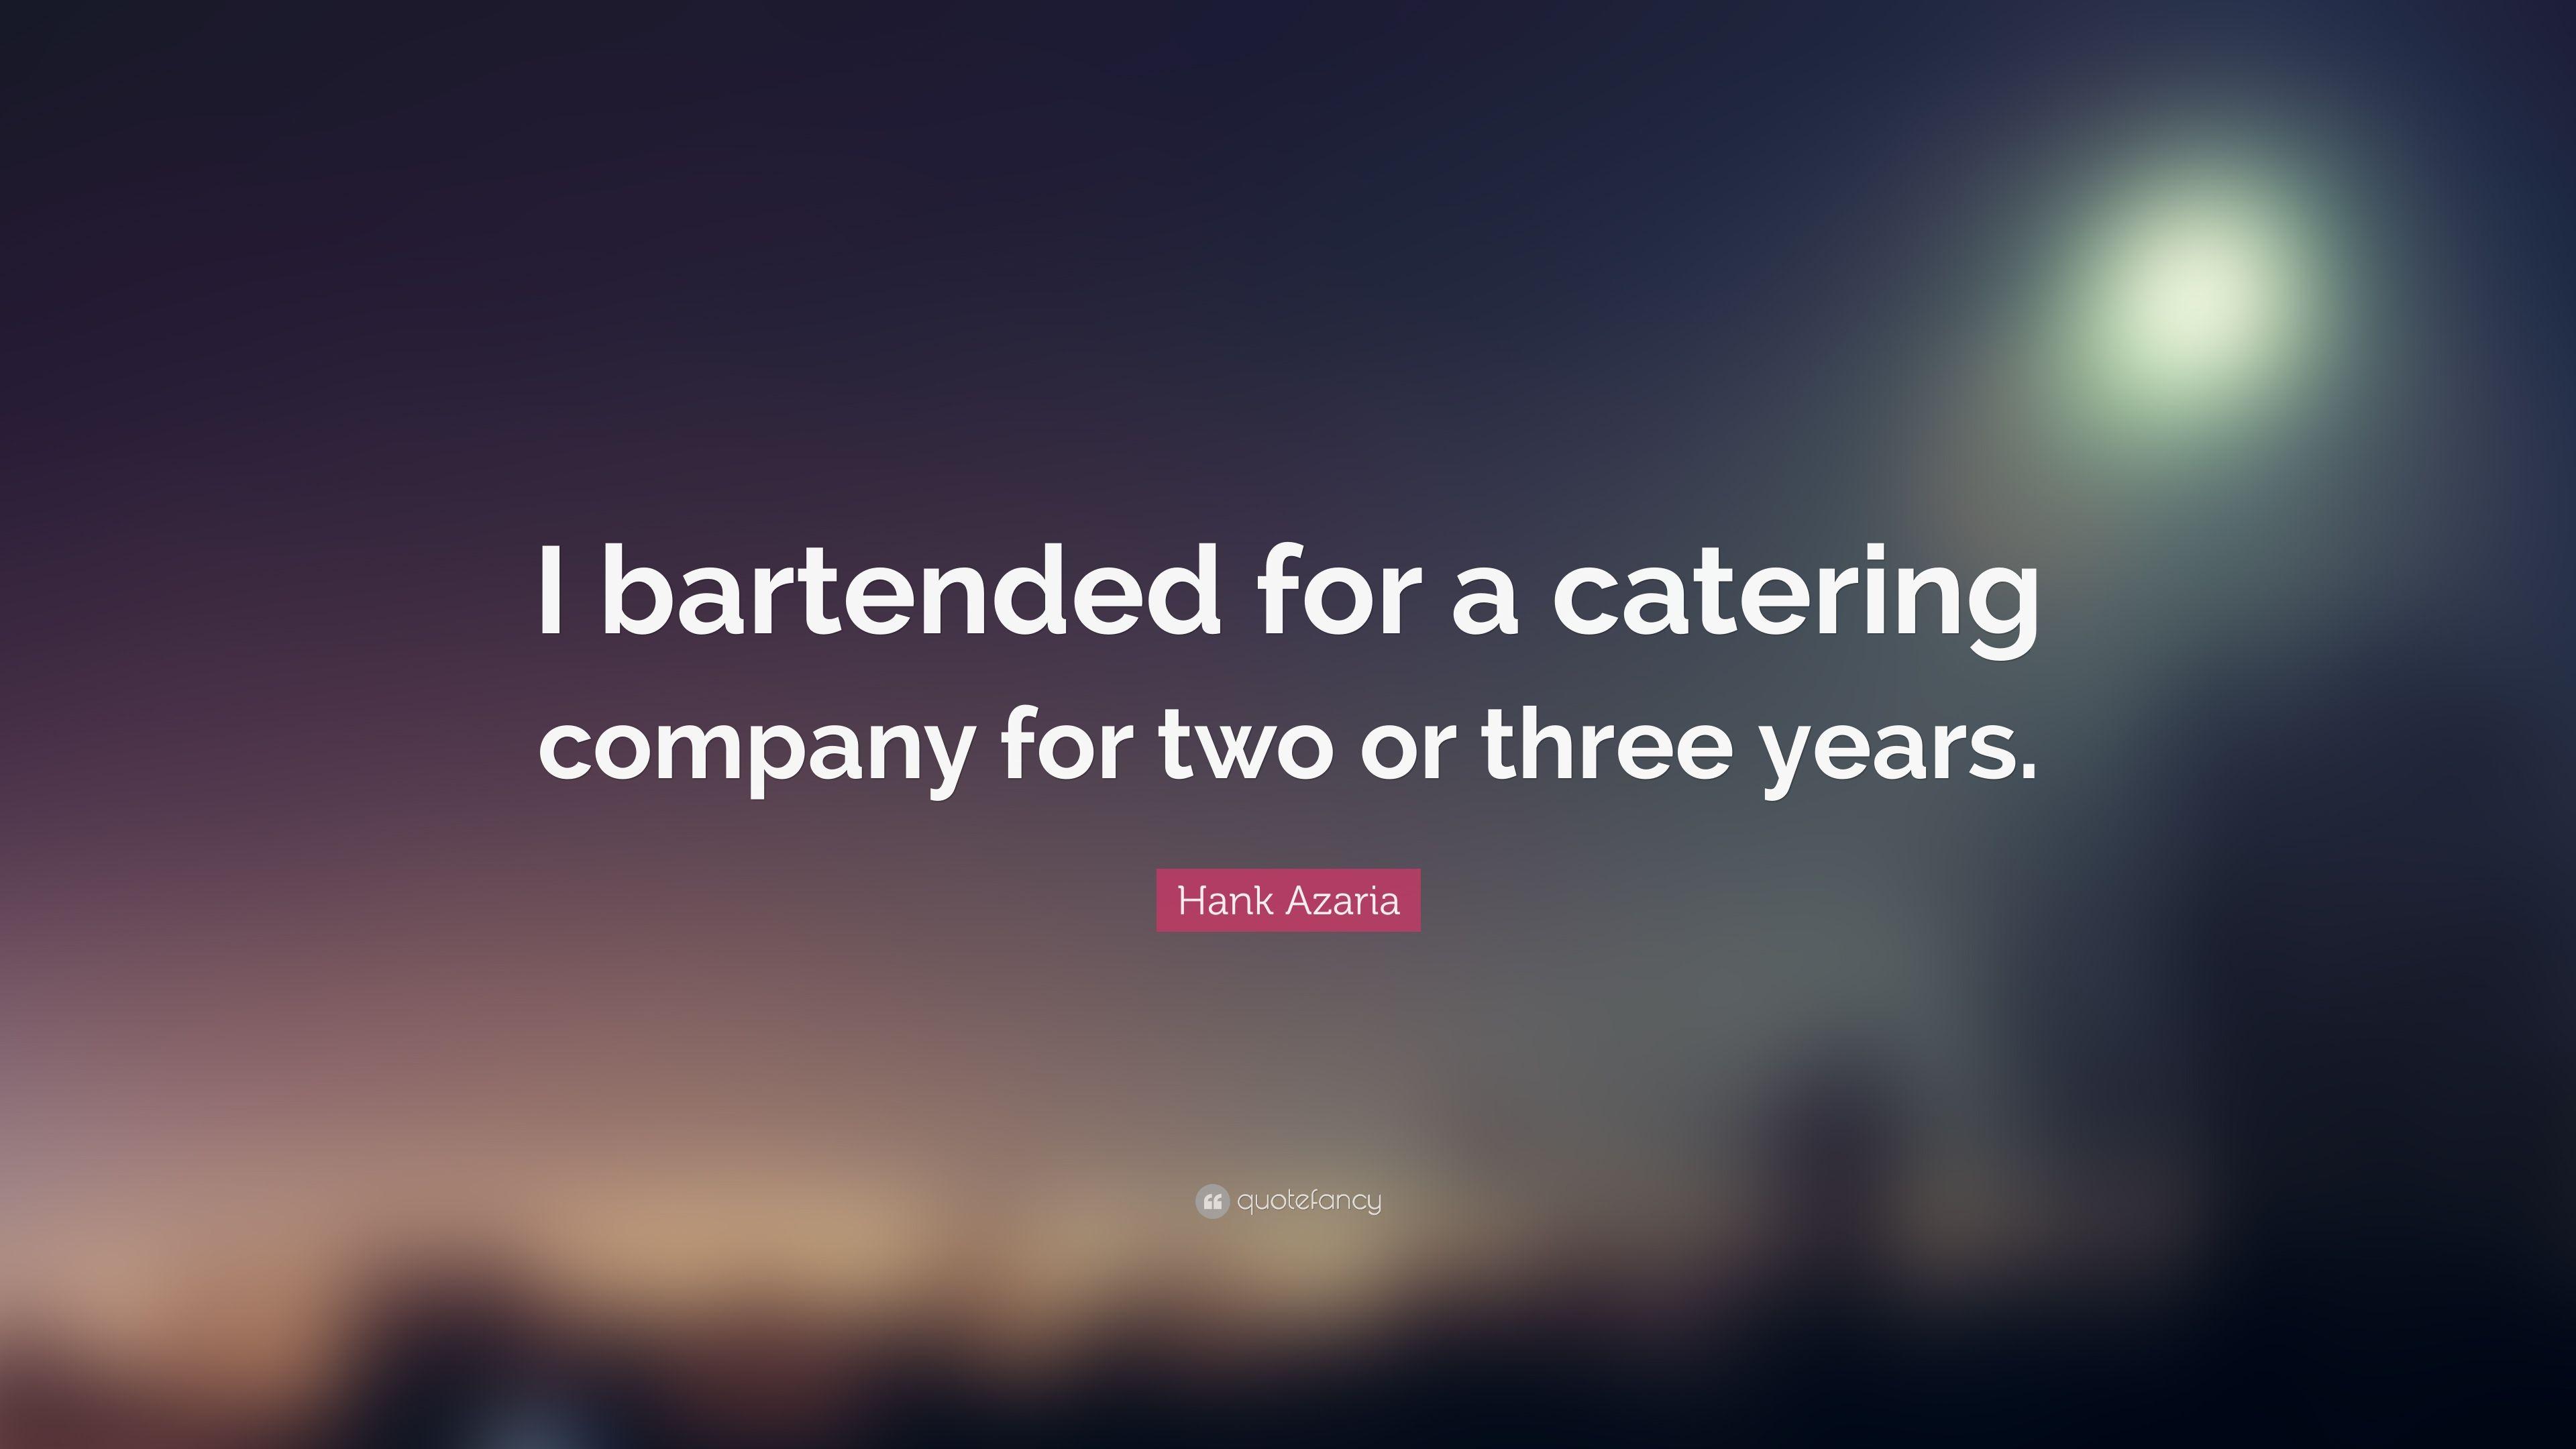 Hank Azaria Quote: “I bartended for a catering company for two or